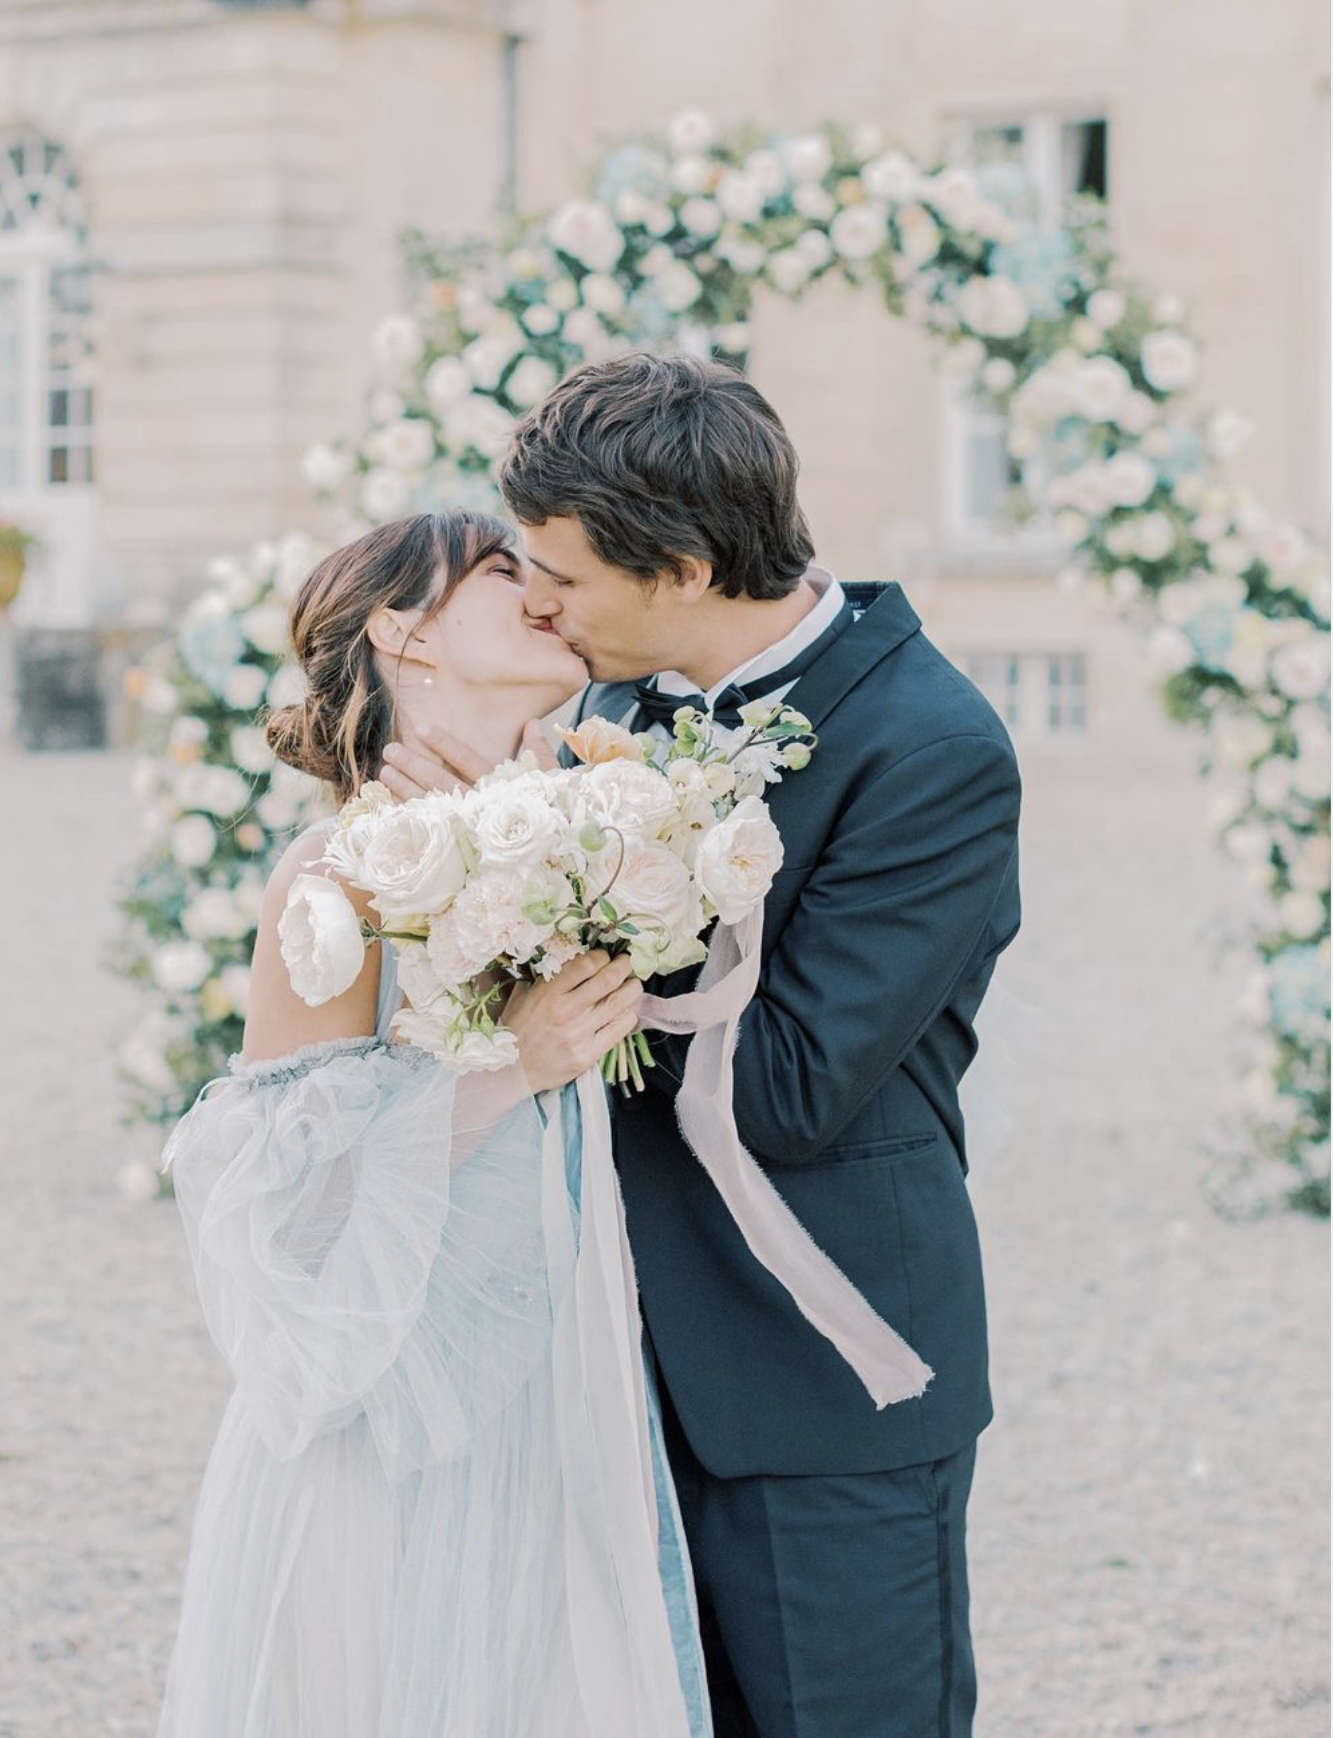 A bride and groom kissing under a flower wedding arch in front of Chateau de Courtomer, an ideal wedding venue.